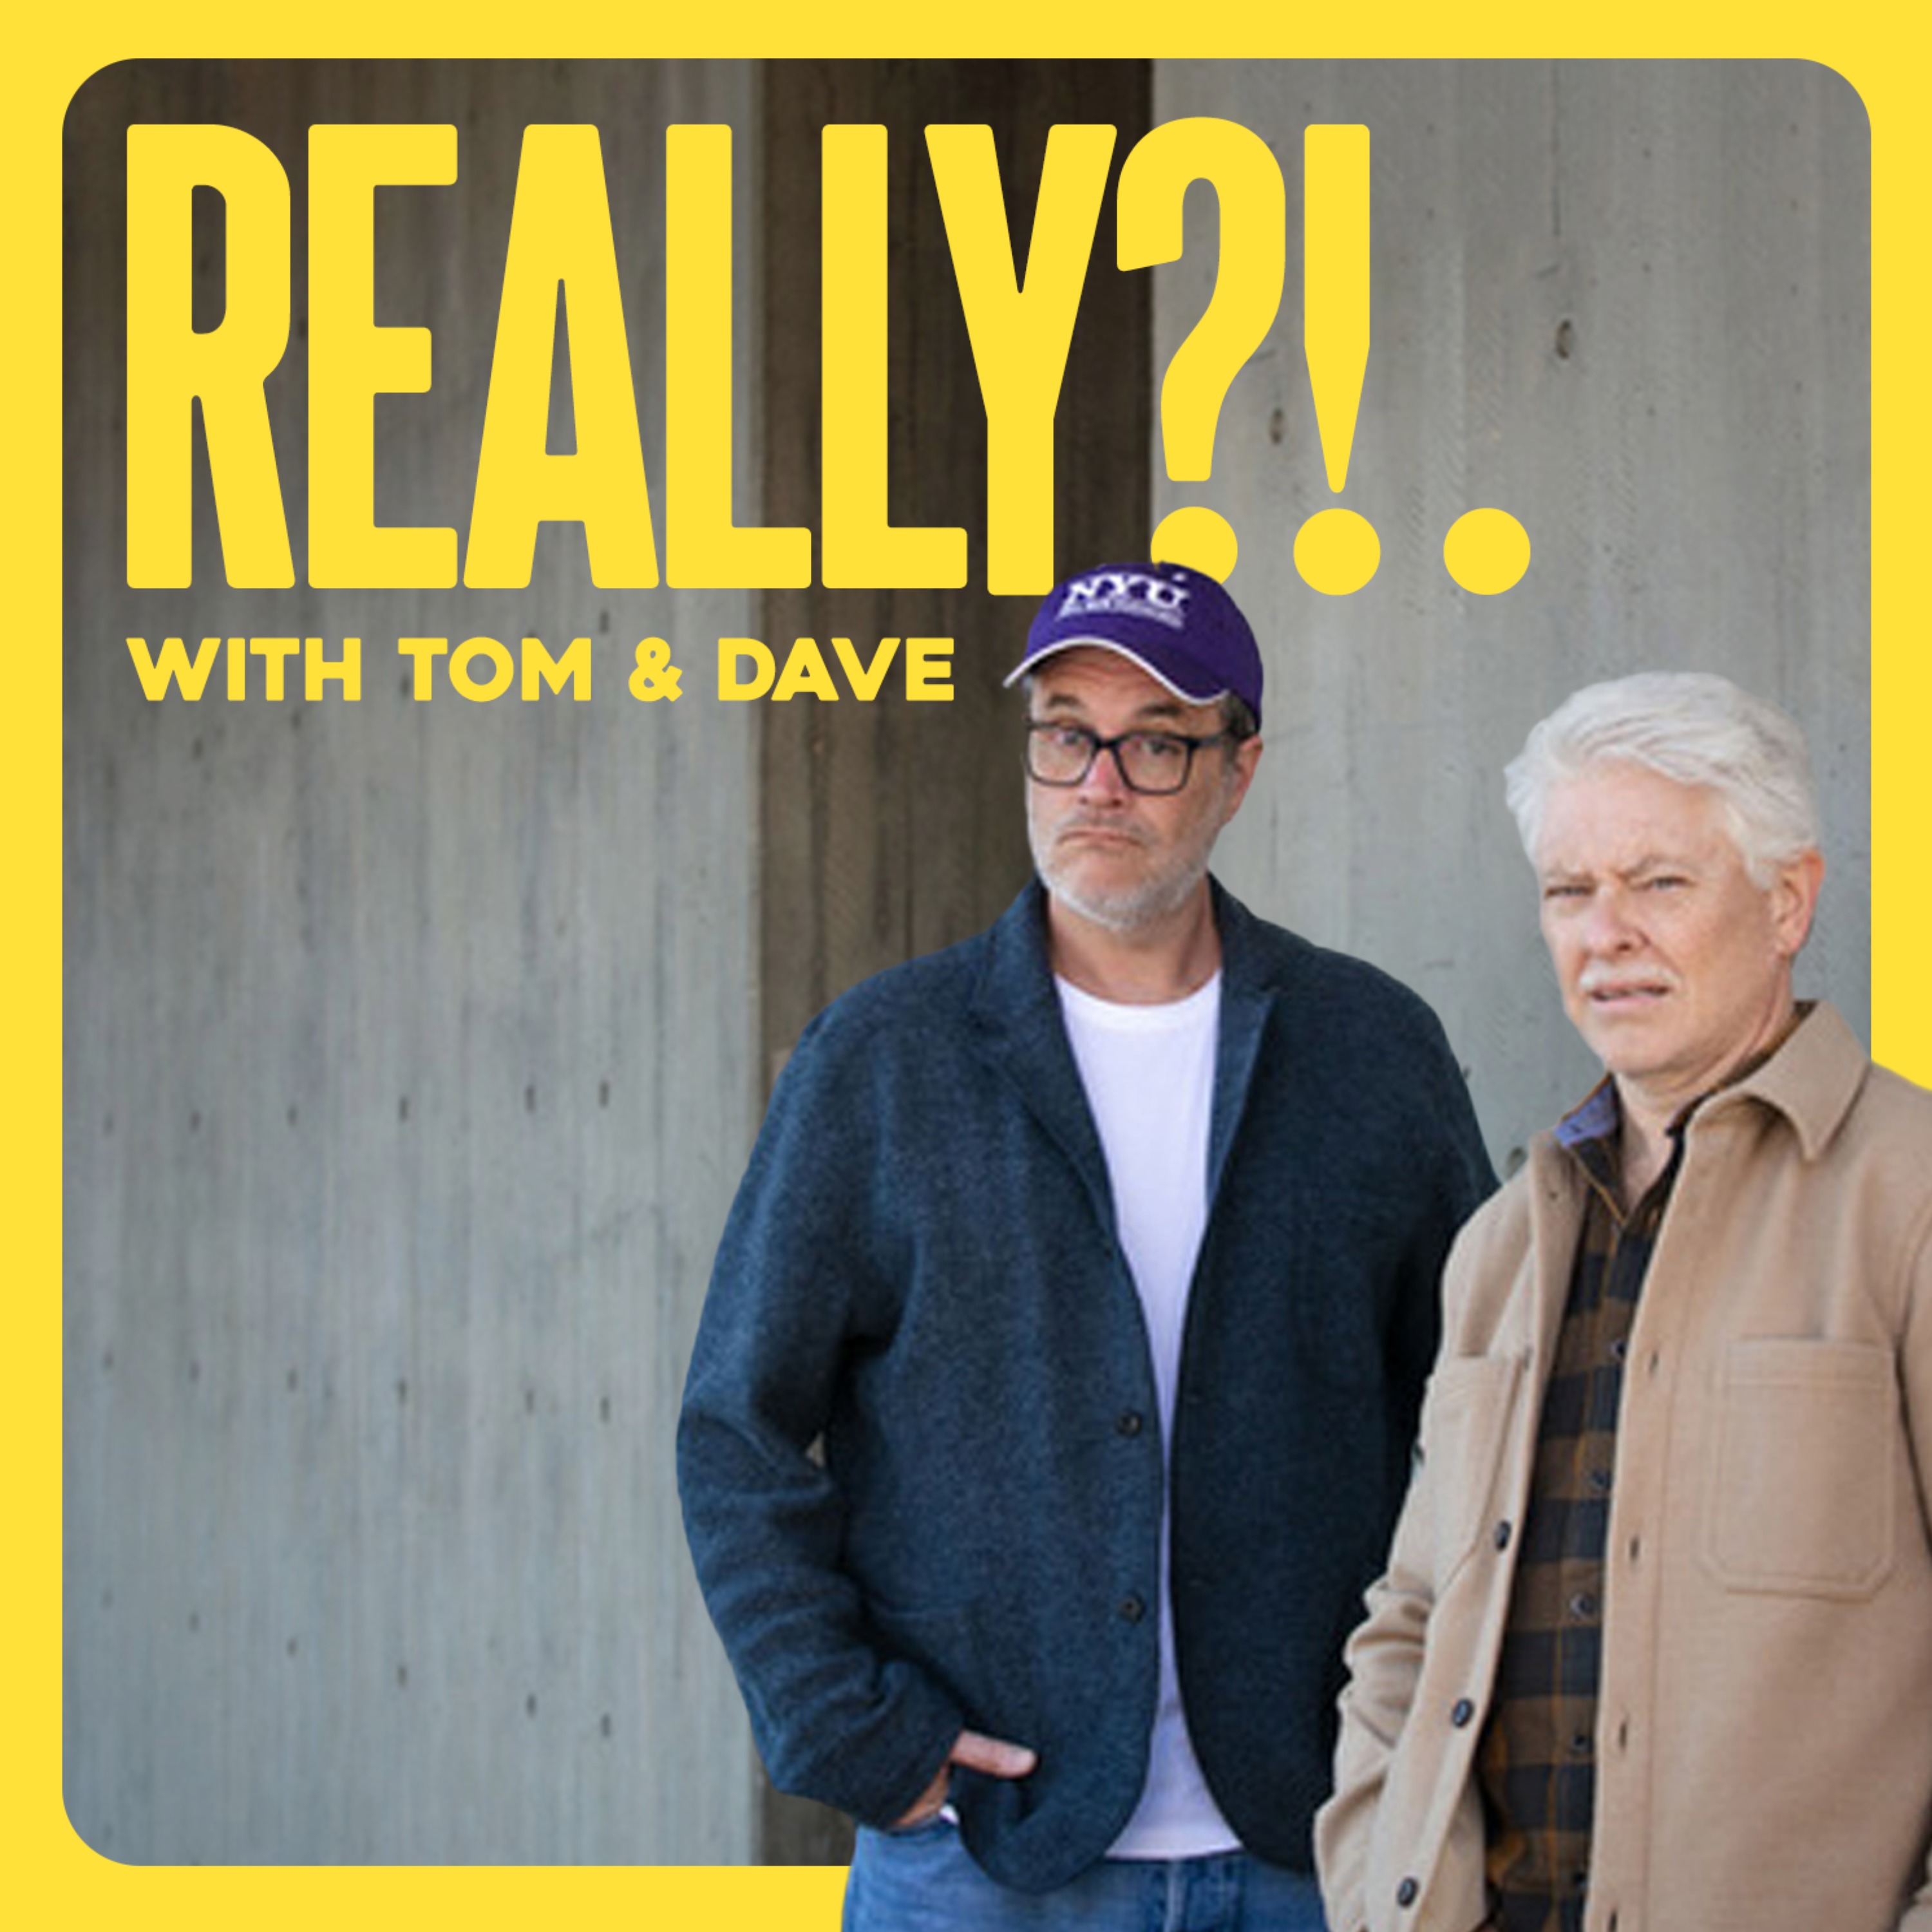 REALLY?!. with Tom and Dave - Episode 1